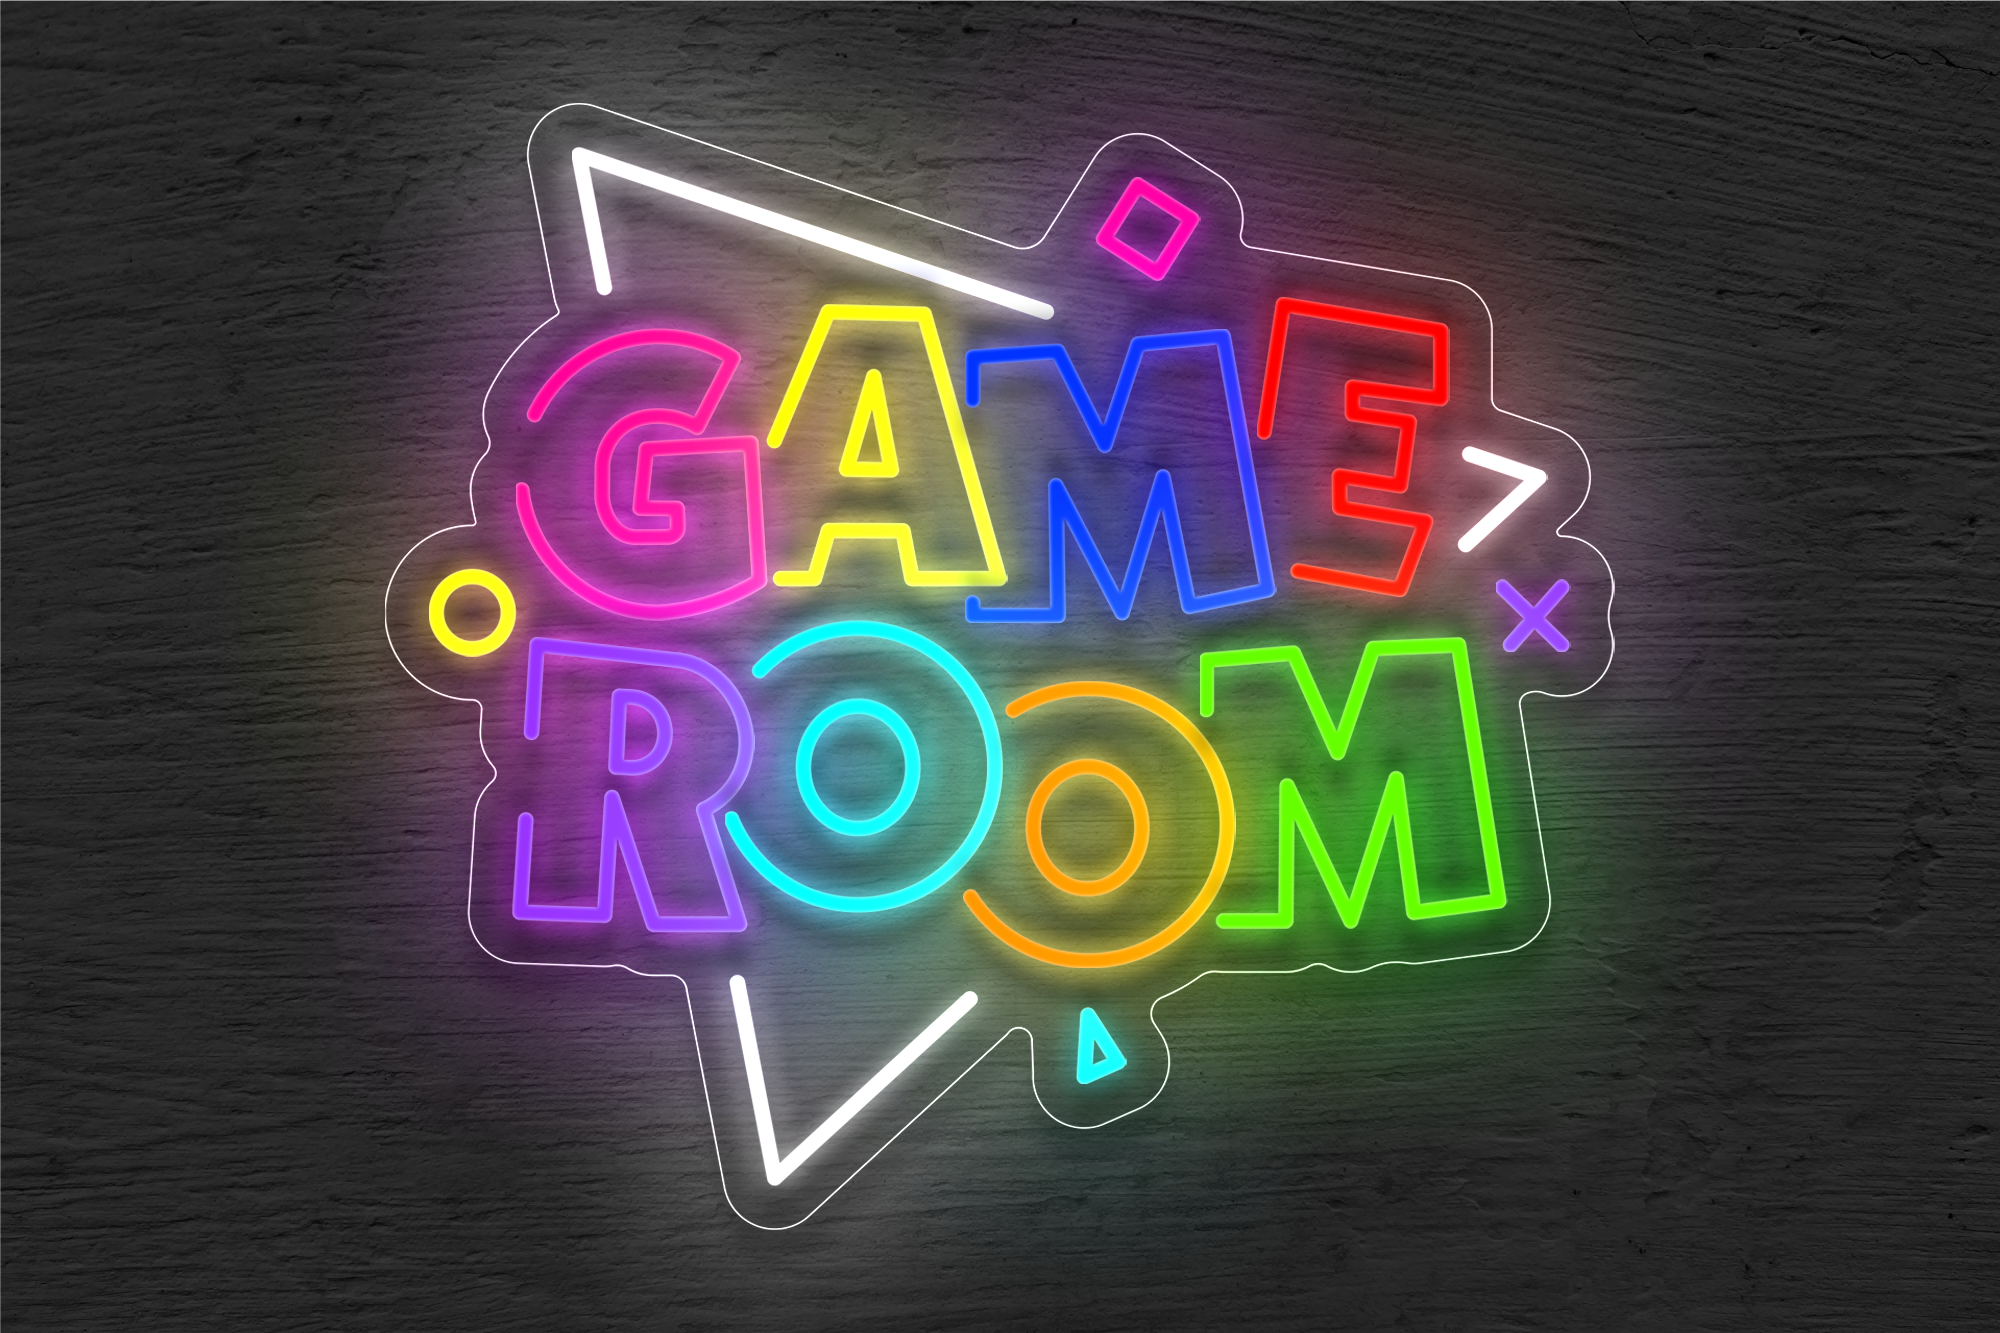 Multi-color "Game Room" LED Neon Sign